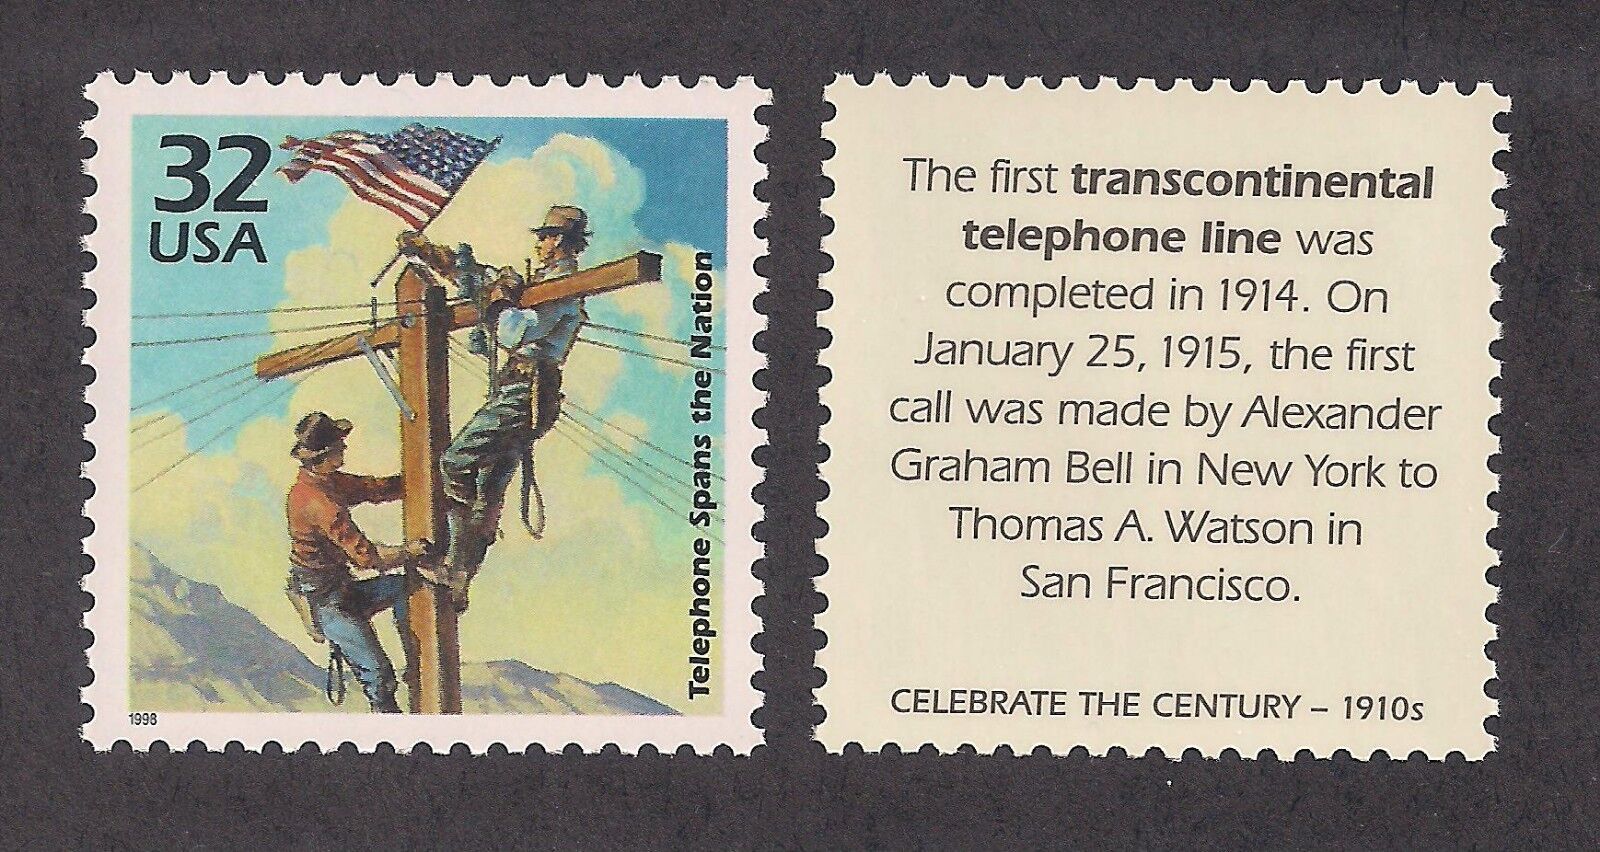 TRANSCONTINENTAL TELEPHONE LINE 1914 - U.S. POSTAGE STAMP - MINT CONDITION